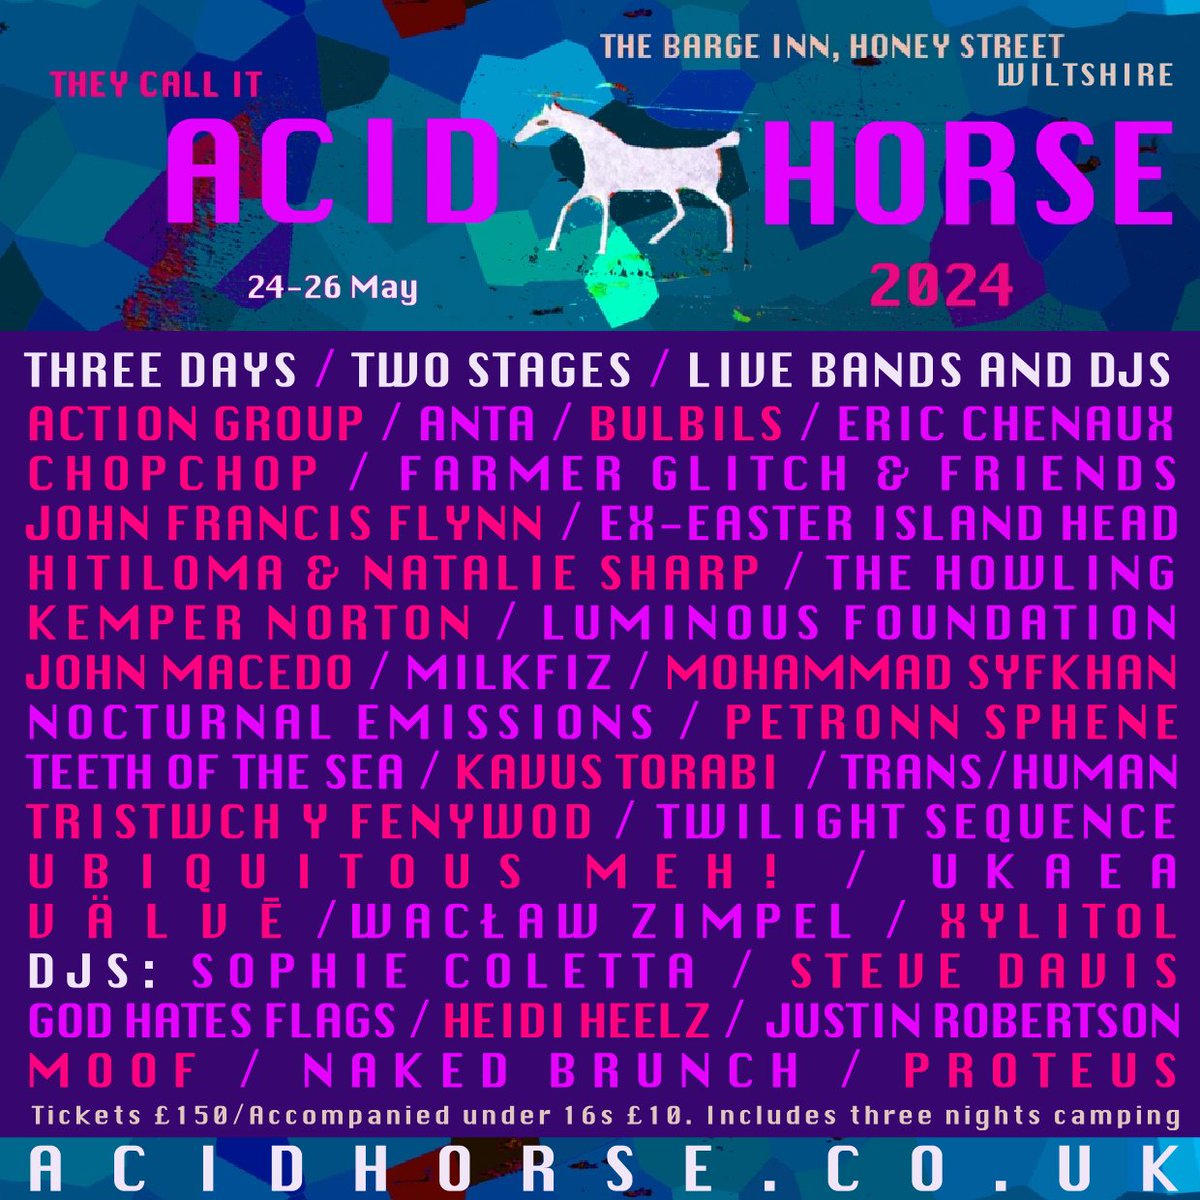 A stacked line-up of underground luminaries for this year's Acid Horse over at The Barge including John Francis Flynn, Teeth of the Sea, Eric Chenaux, Bulbils, Wacław Zimpel and more. Check out acidhorse.co.uk for more details. @theQuietus @strangepress